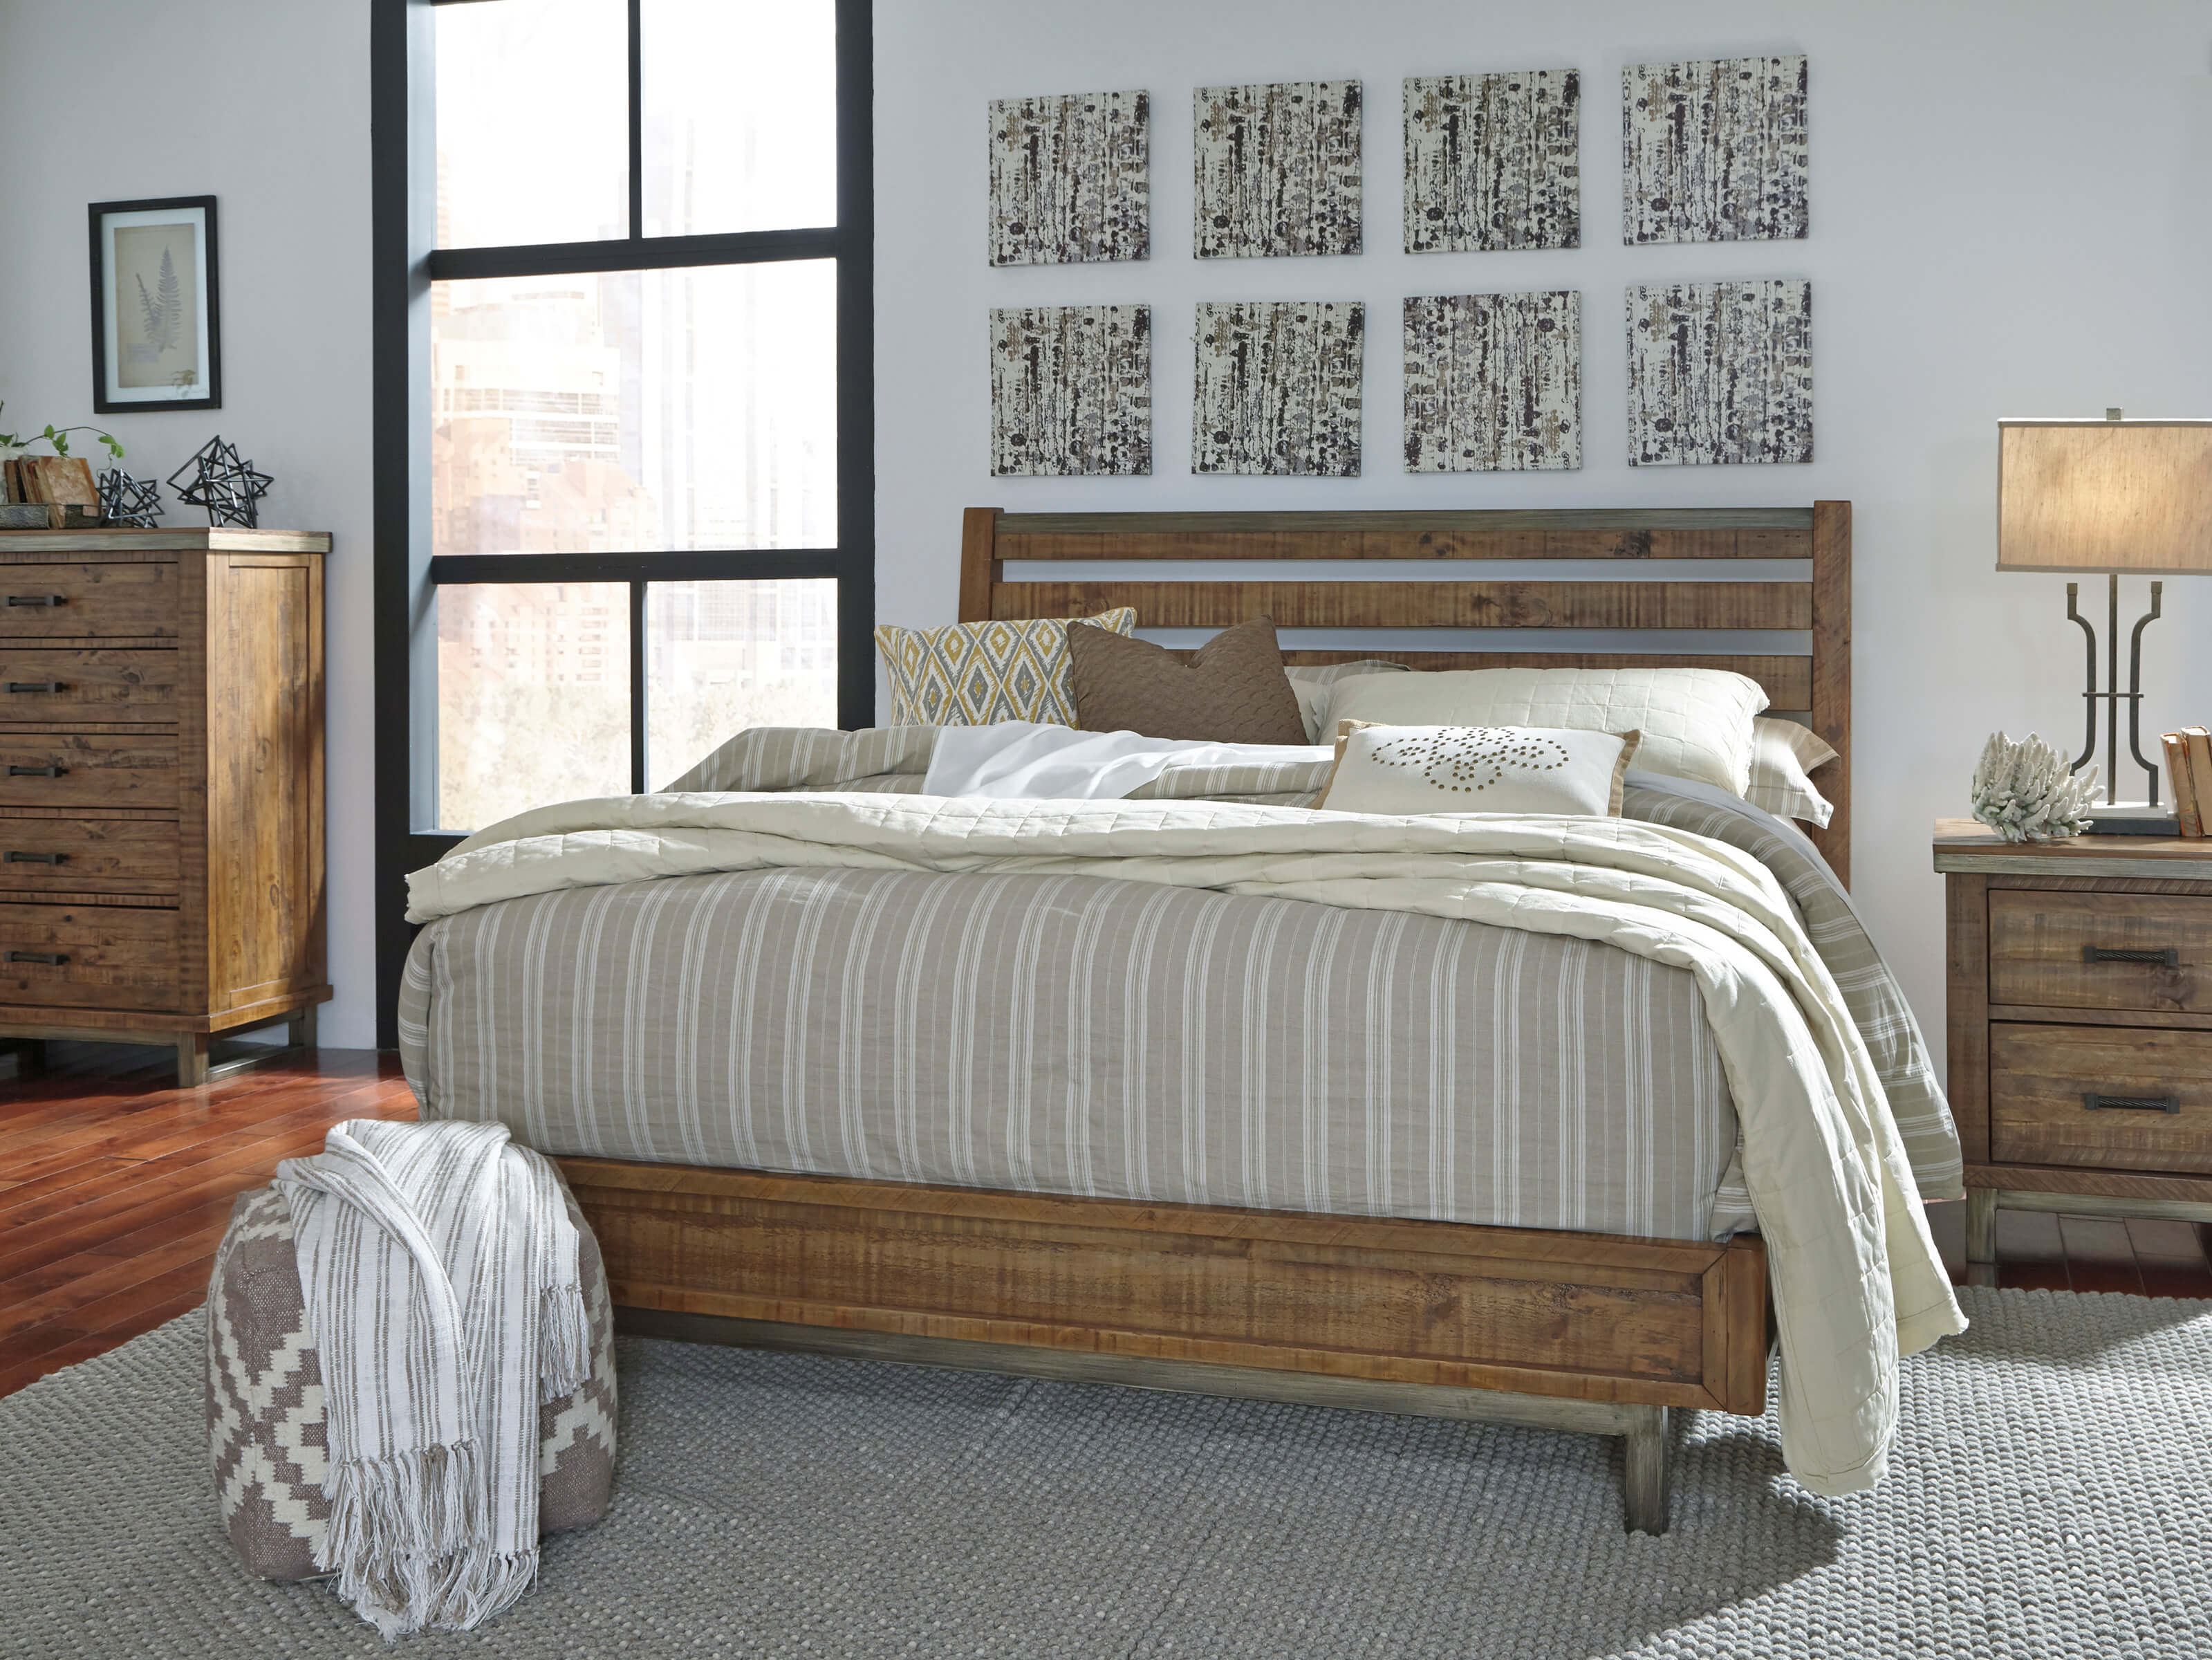 8 Furniture Everyone Should Have in a Bedroom